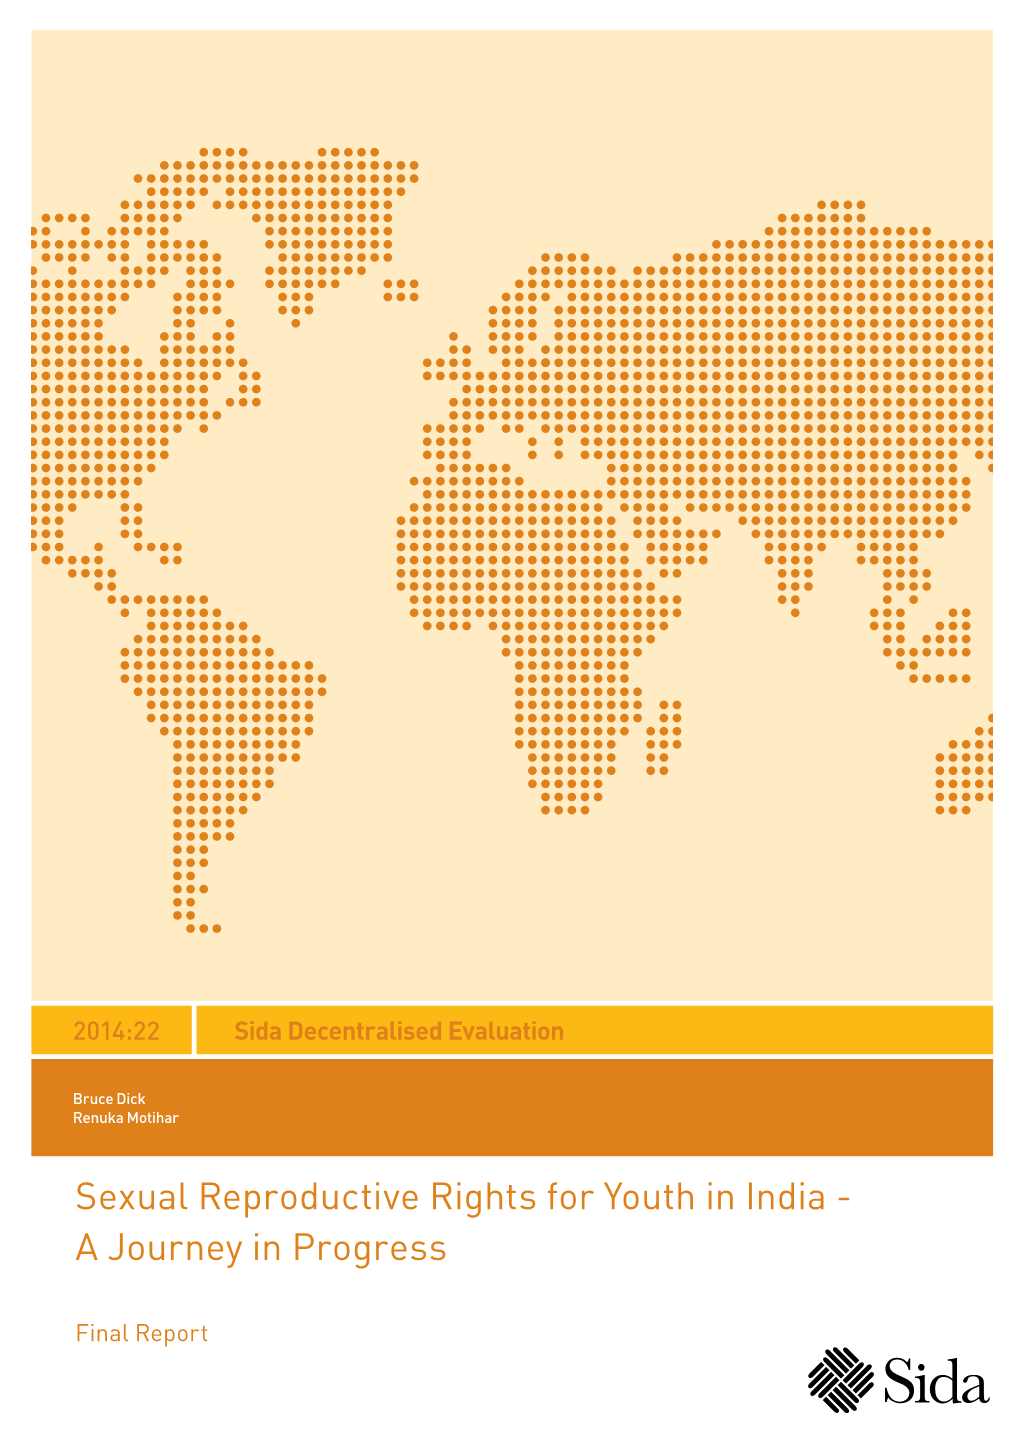 Sexual Reproductive Rights for Youth in India - a Journey in Progress